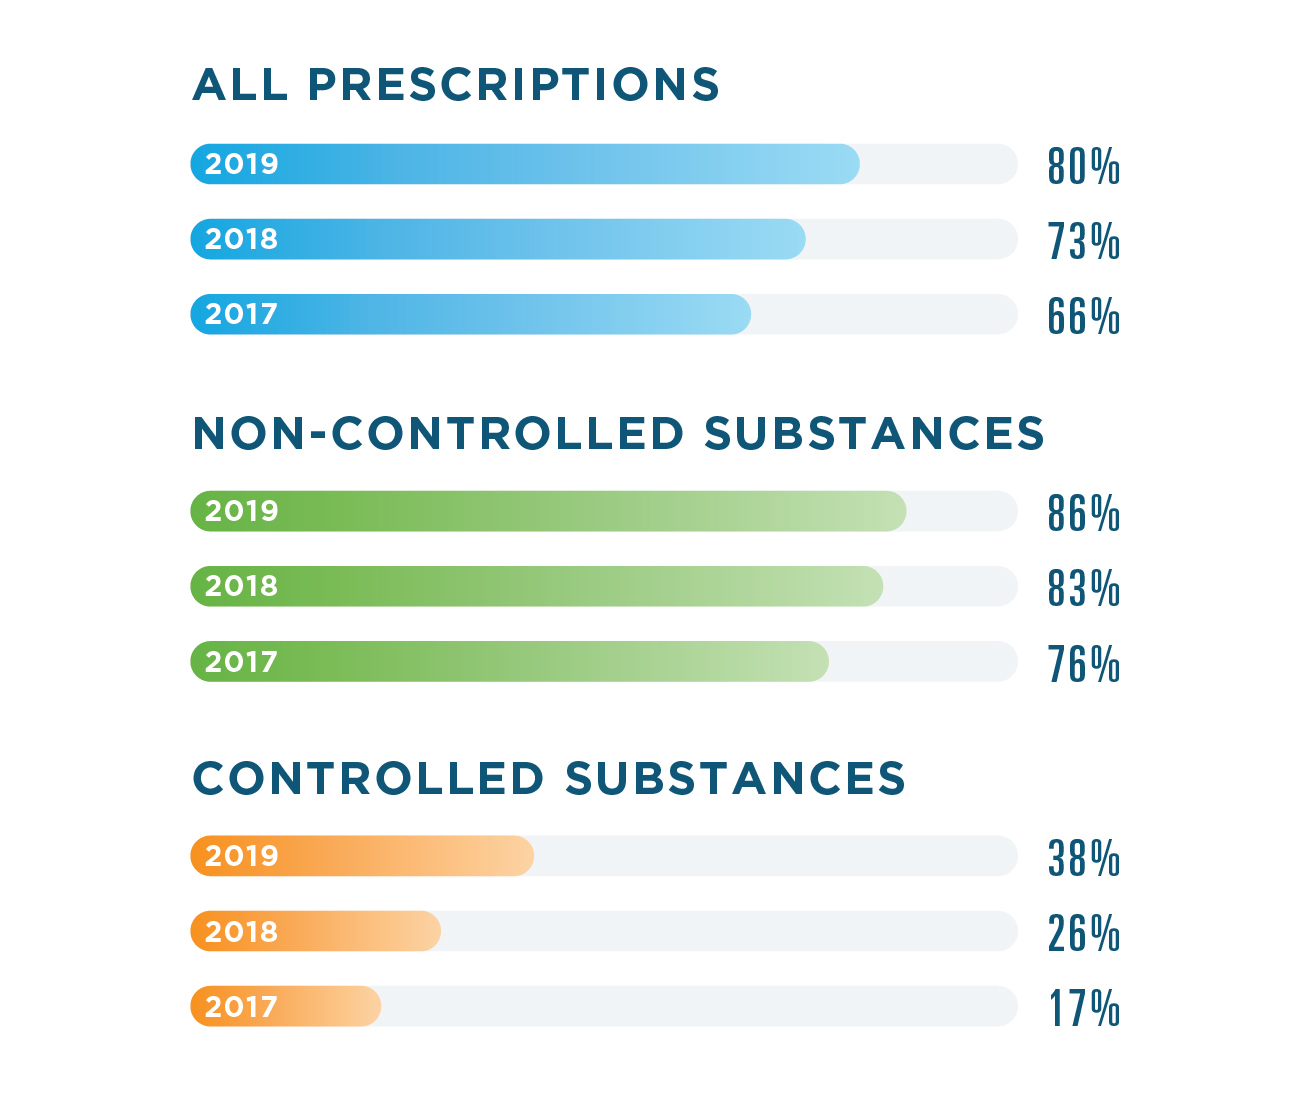 In 2019, 80% of all prescriptions filled were written electronically, compared to 73% in 2018 and 66% in 2017. For non-controlled substances, the rate of e-prescribing was 86% in 2019, 83% in 2018 and 76% in 2017. For controlled substances, the rate of e-prescribing was 38% in 2019, 26% in 2018 and 17% in 2017.